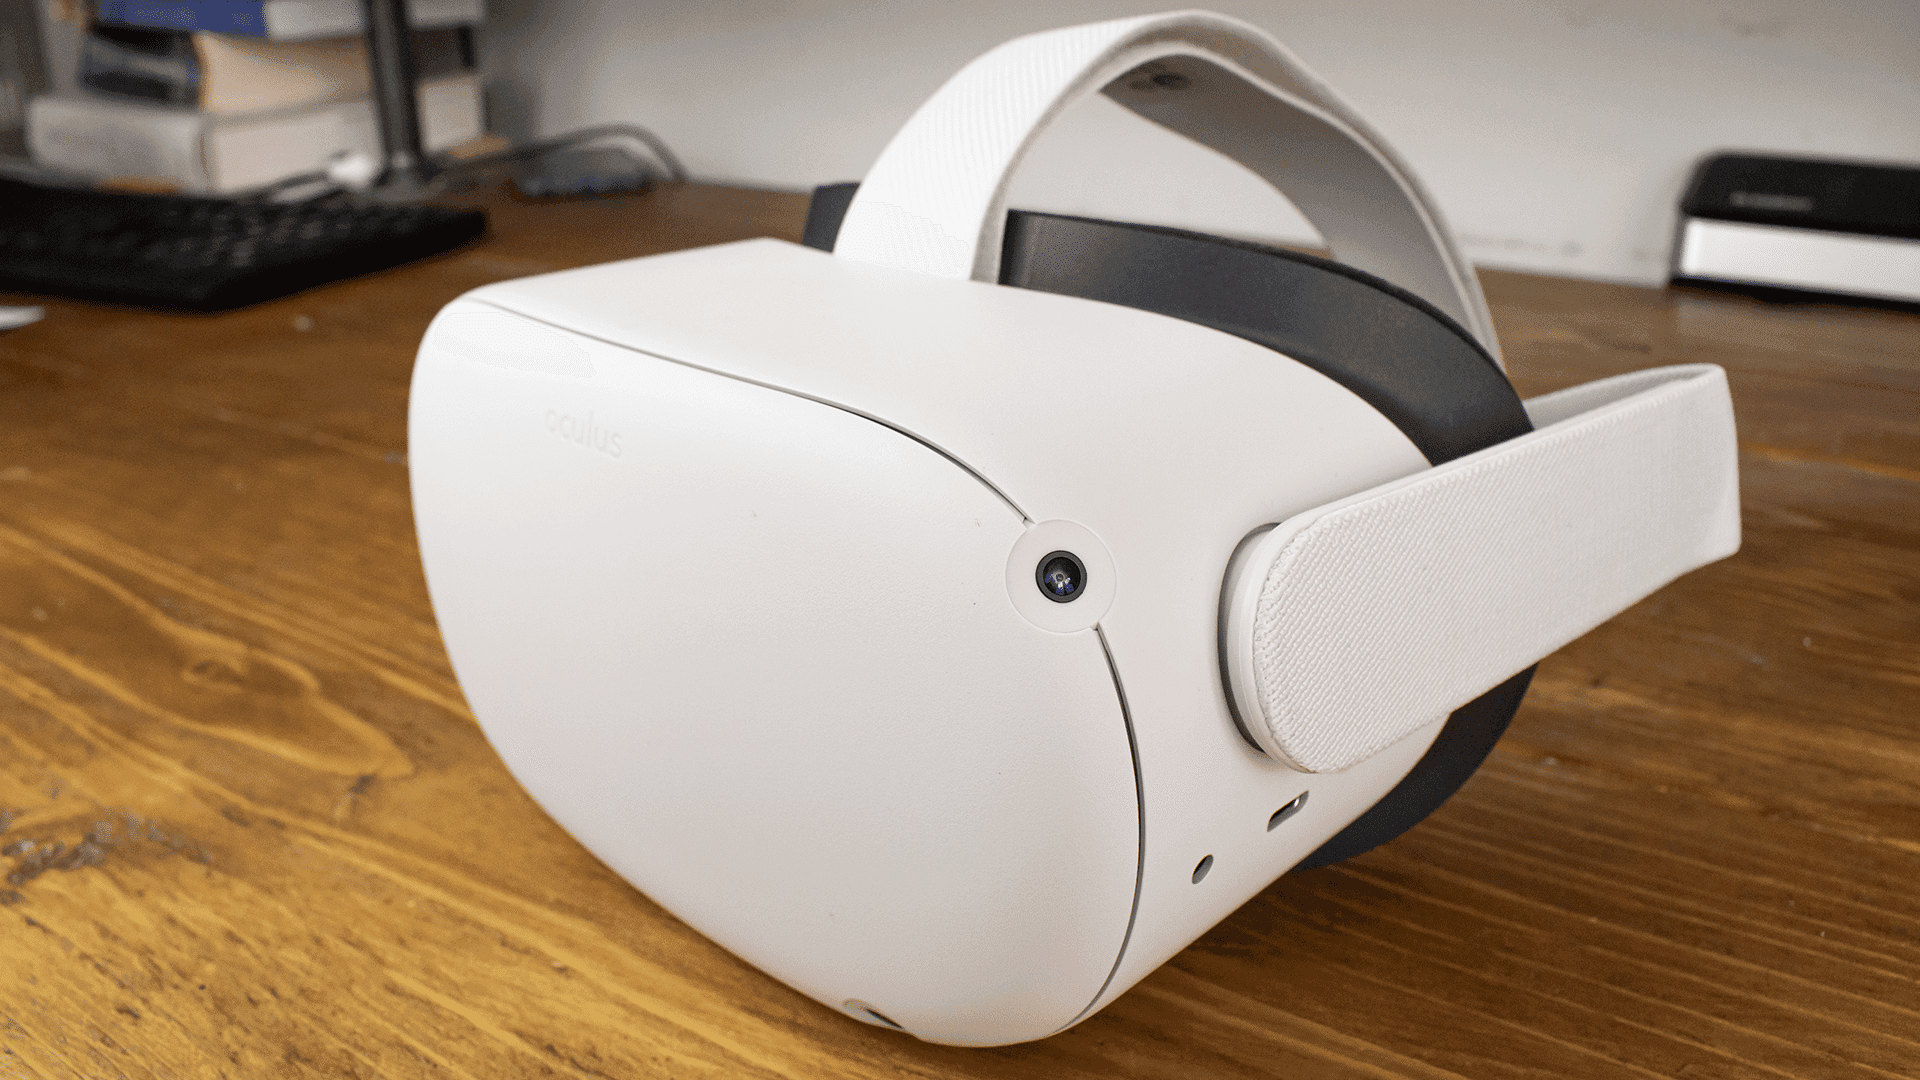 "Combine virtual reality with gaming with the revolutionary Oculus Quest 2"